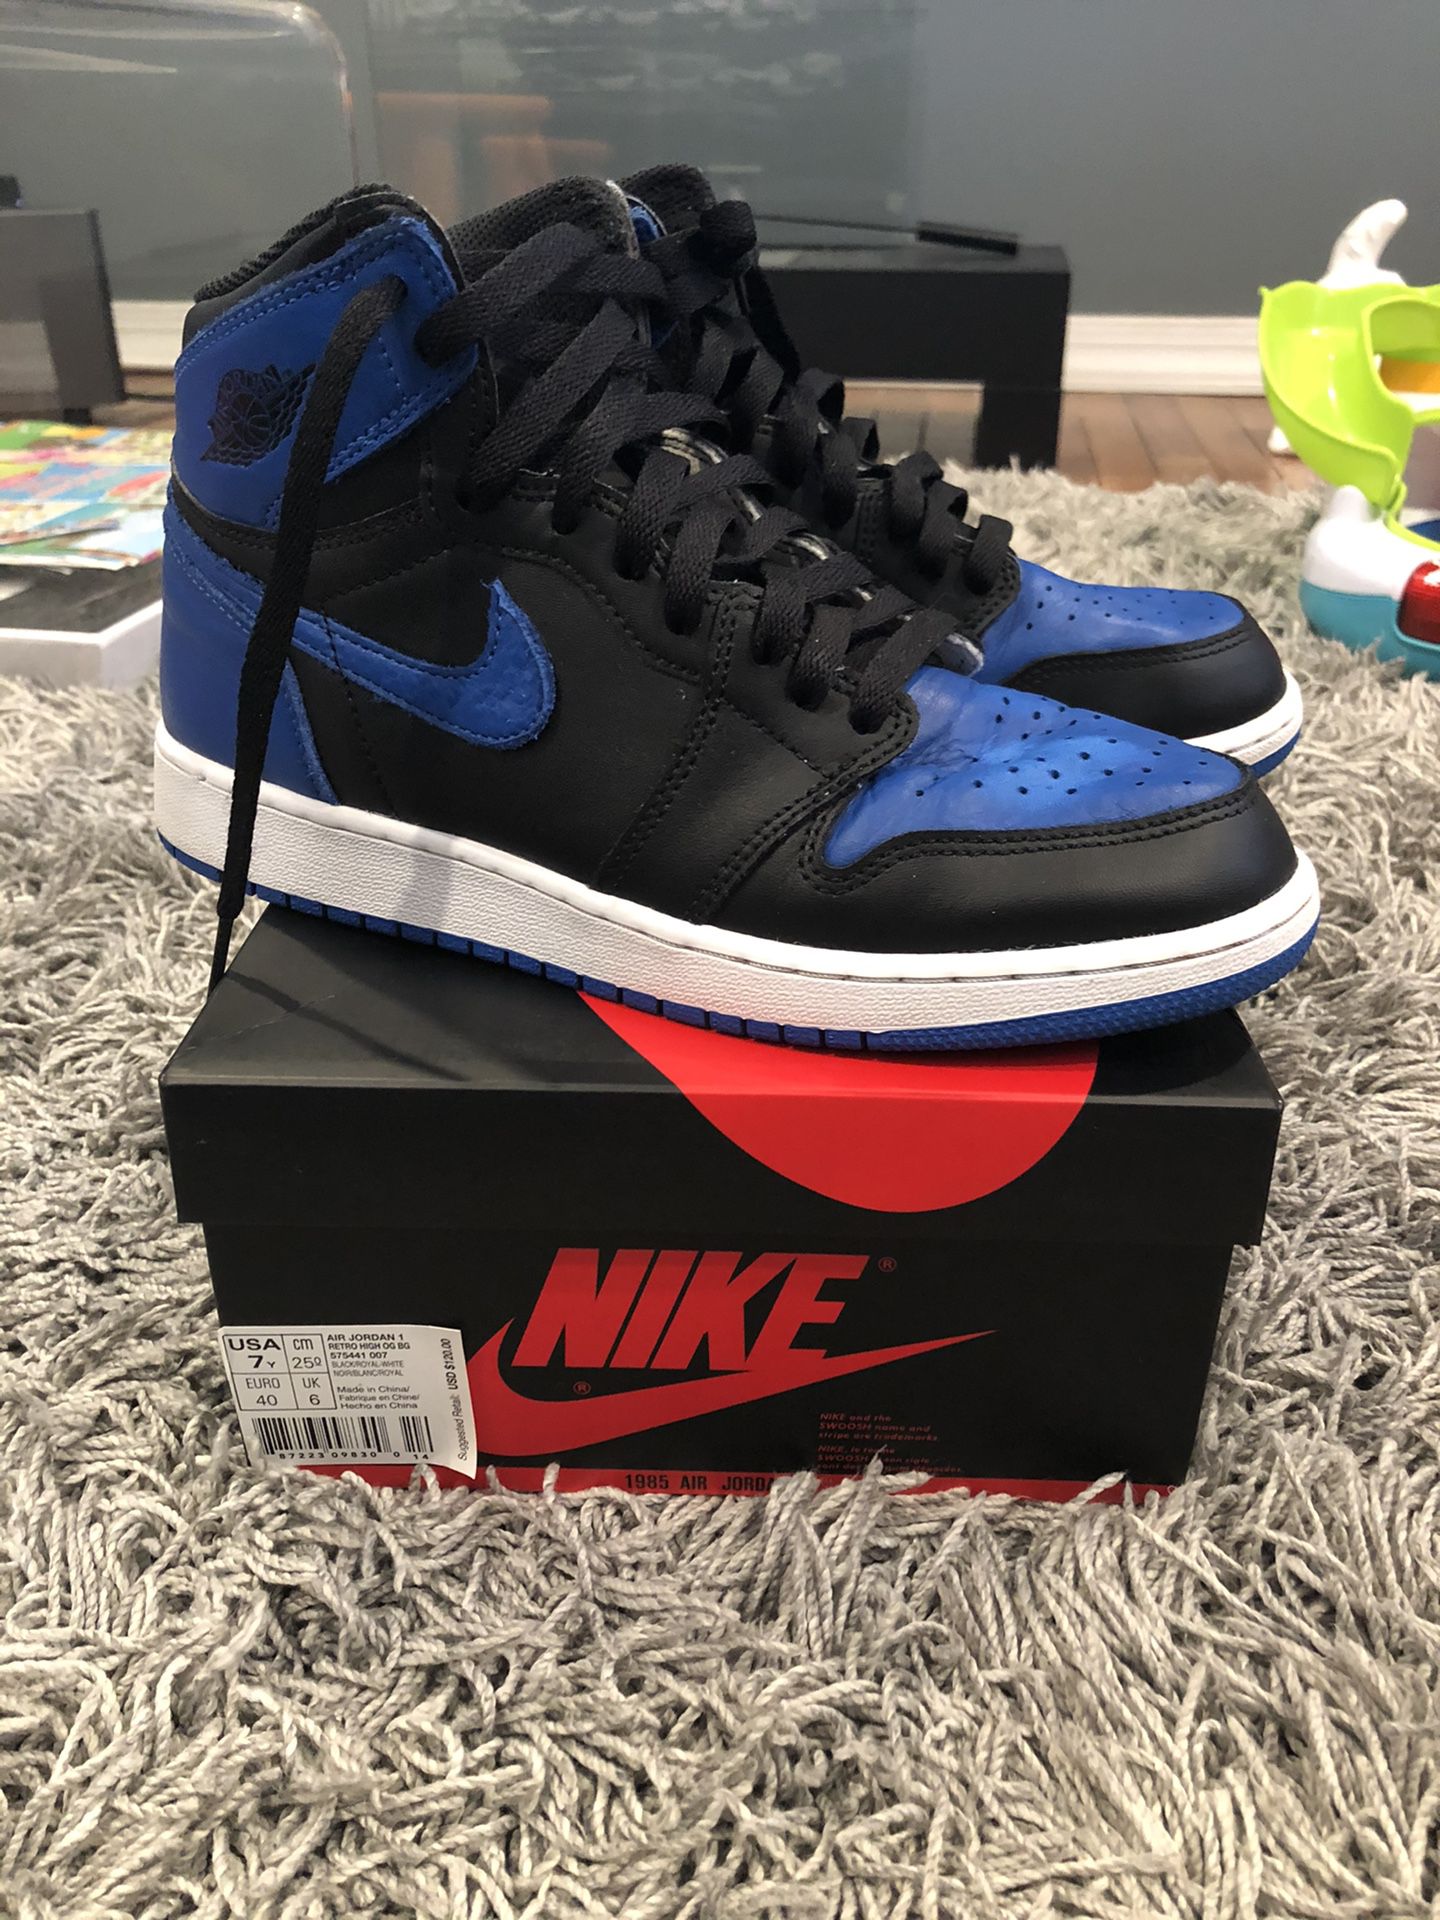 Jordan royal (2017 ) size 7y. for sale with box